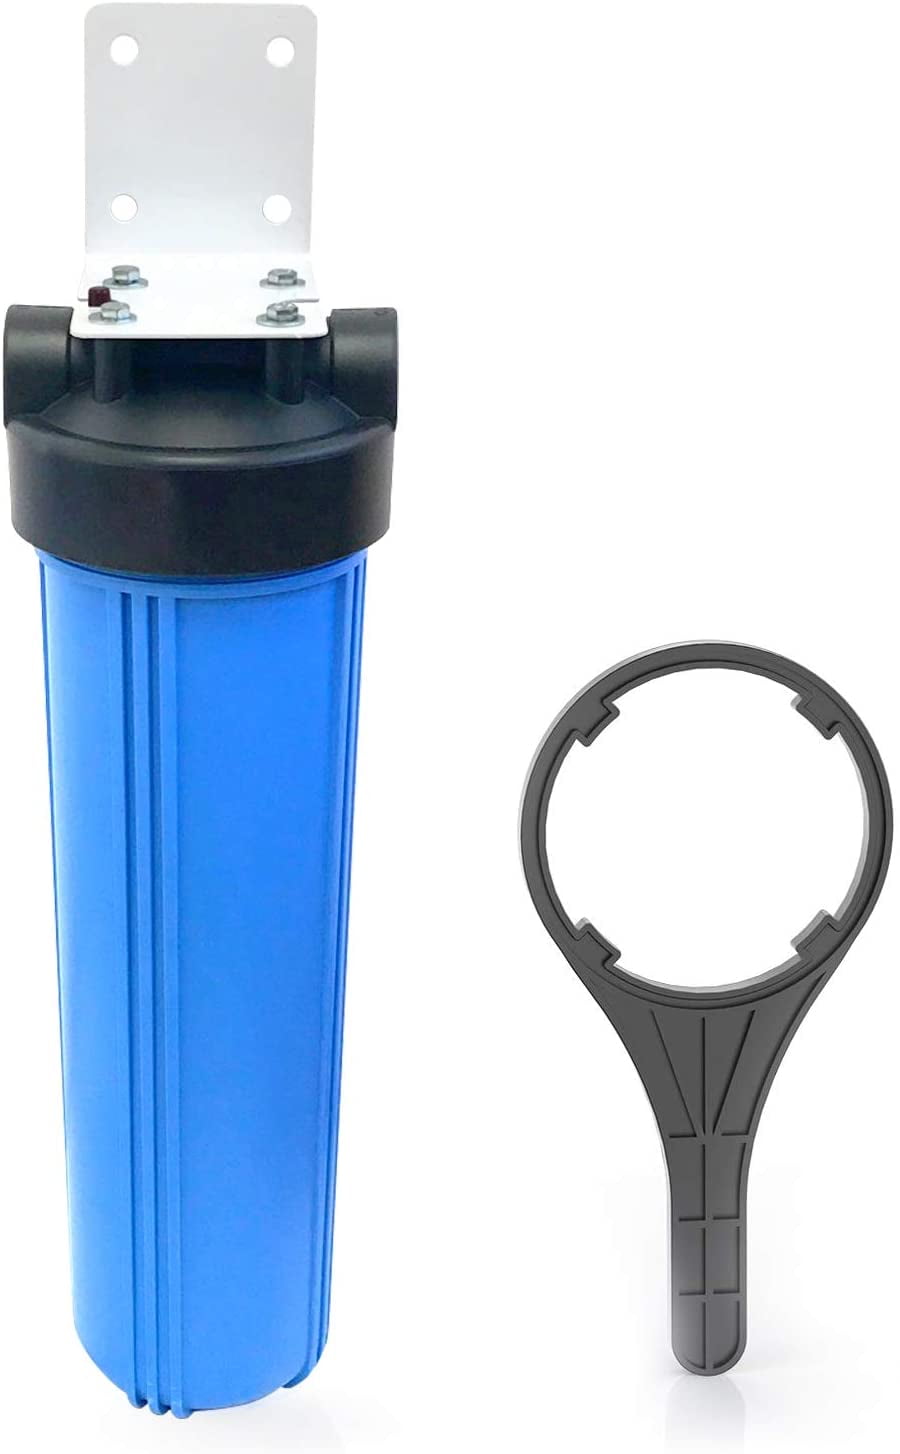 BIG BLUE HOUSING WITH STAND BRACKET FOR 4.5" X 20" FILTER/CARTRIDGE 1" Inlet 3 